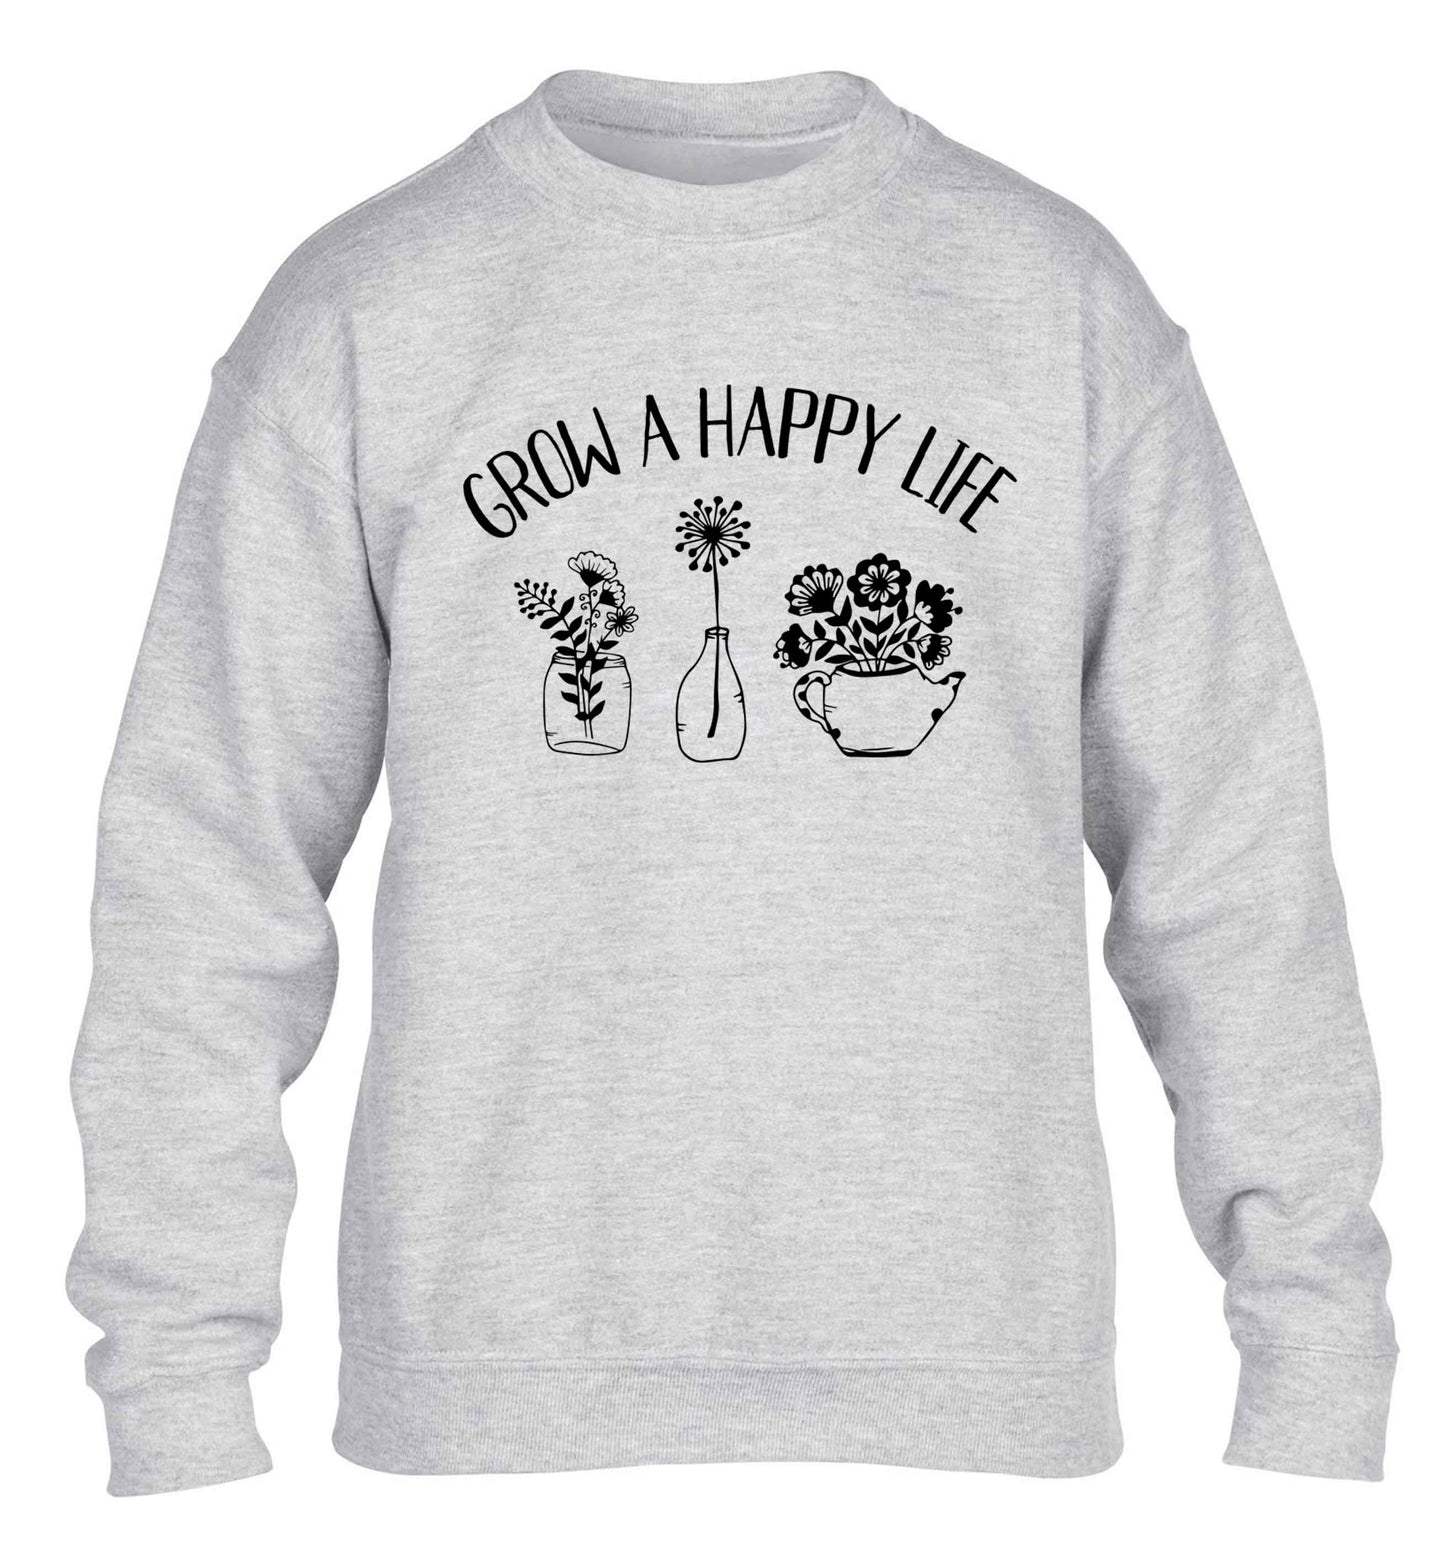 Grow a happy life children's grey sweater 12-13 Years